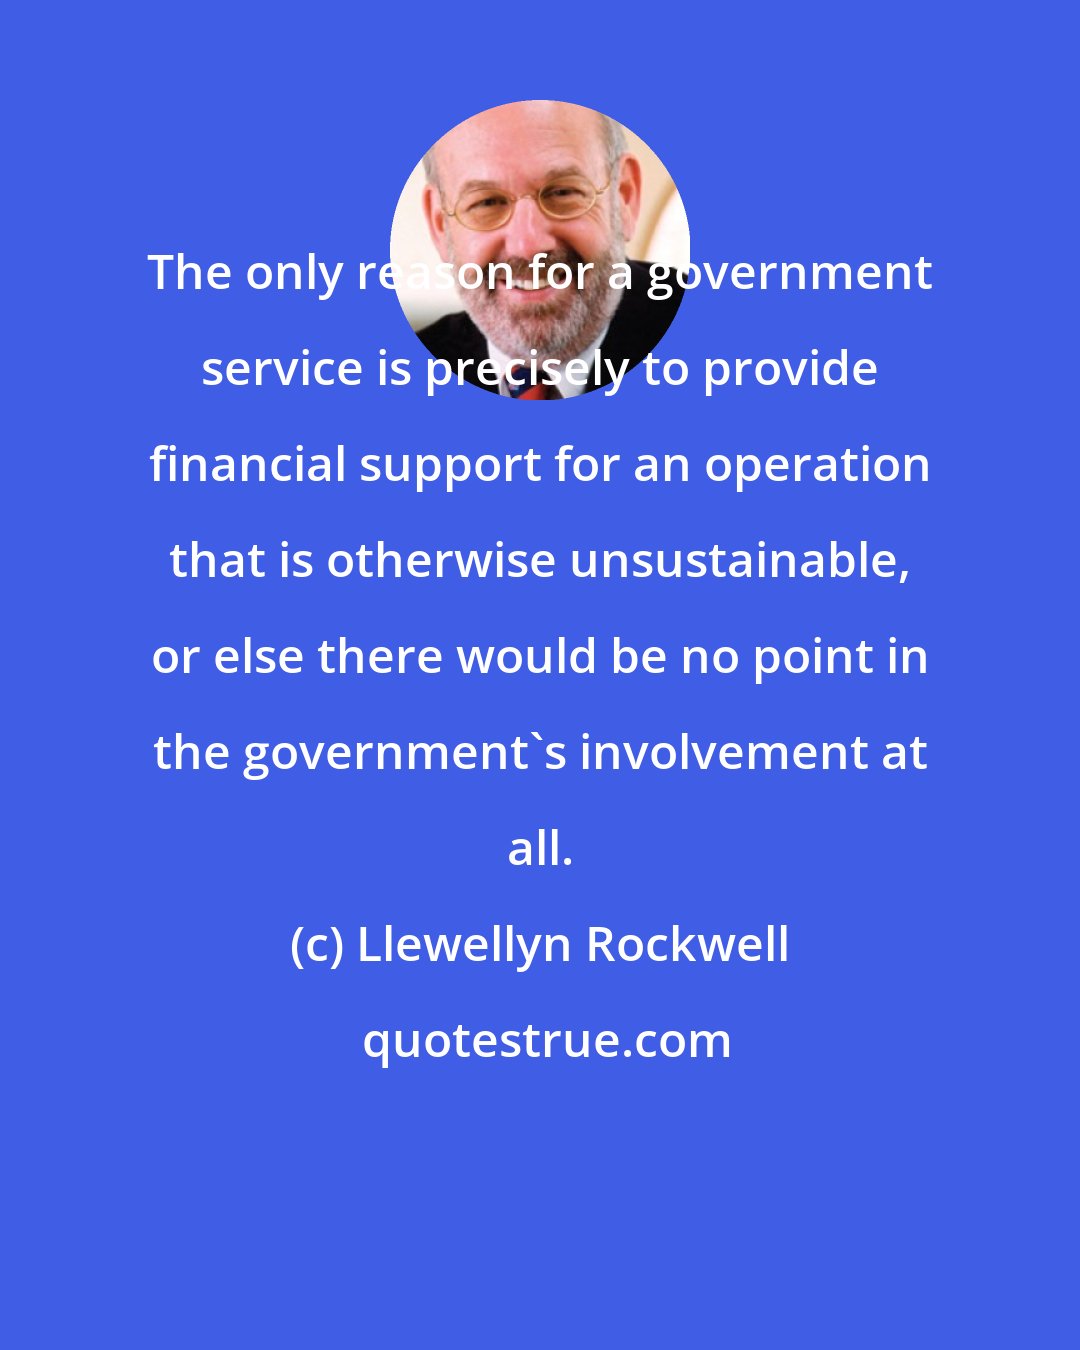 Llewellyn Rockwell: The only reason for a government service is precisely to provide financial support for an operation that is otherwise unsustainable, or else there would be no point in the government's involvement at all.